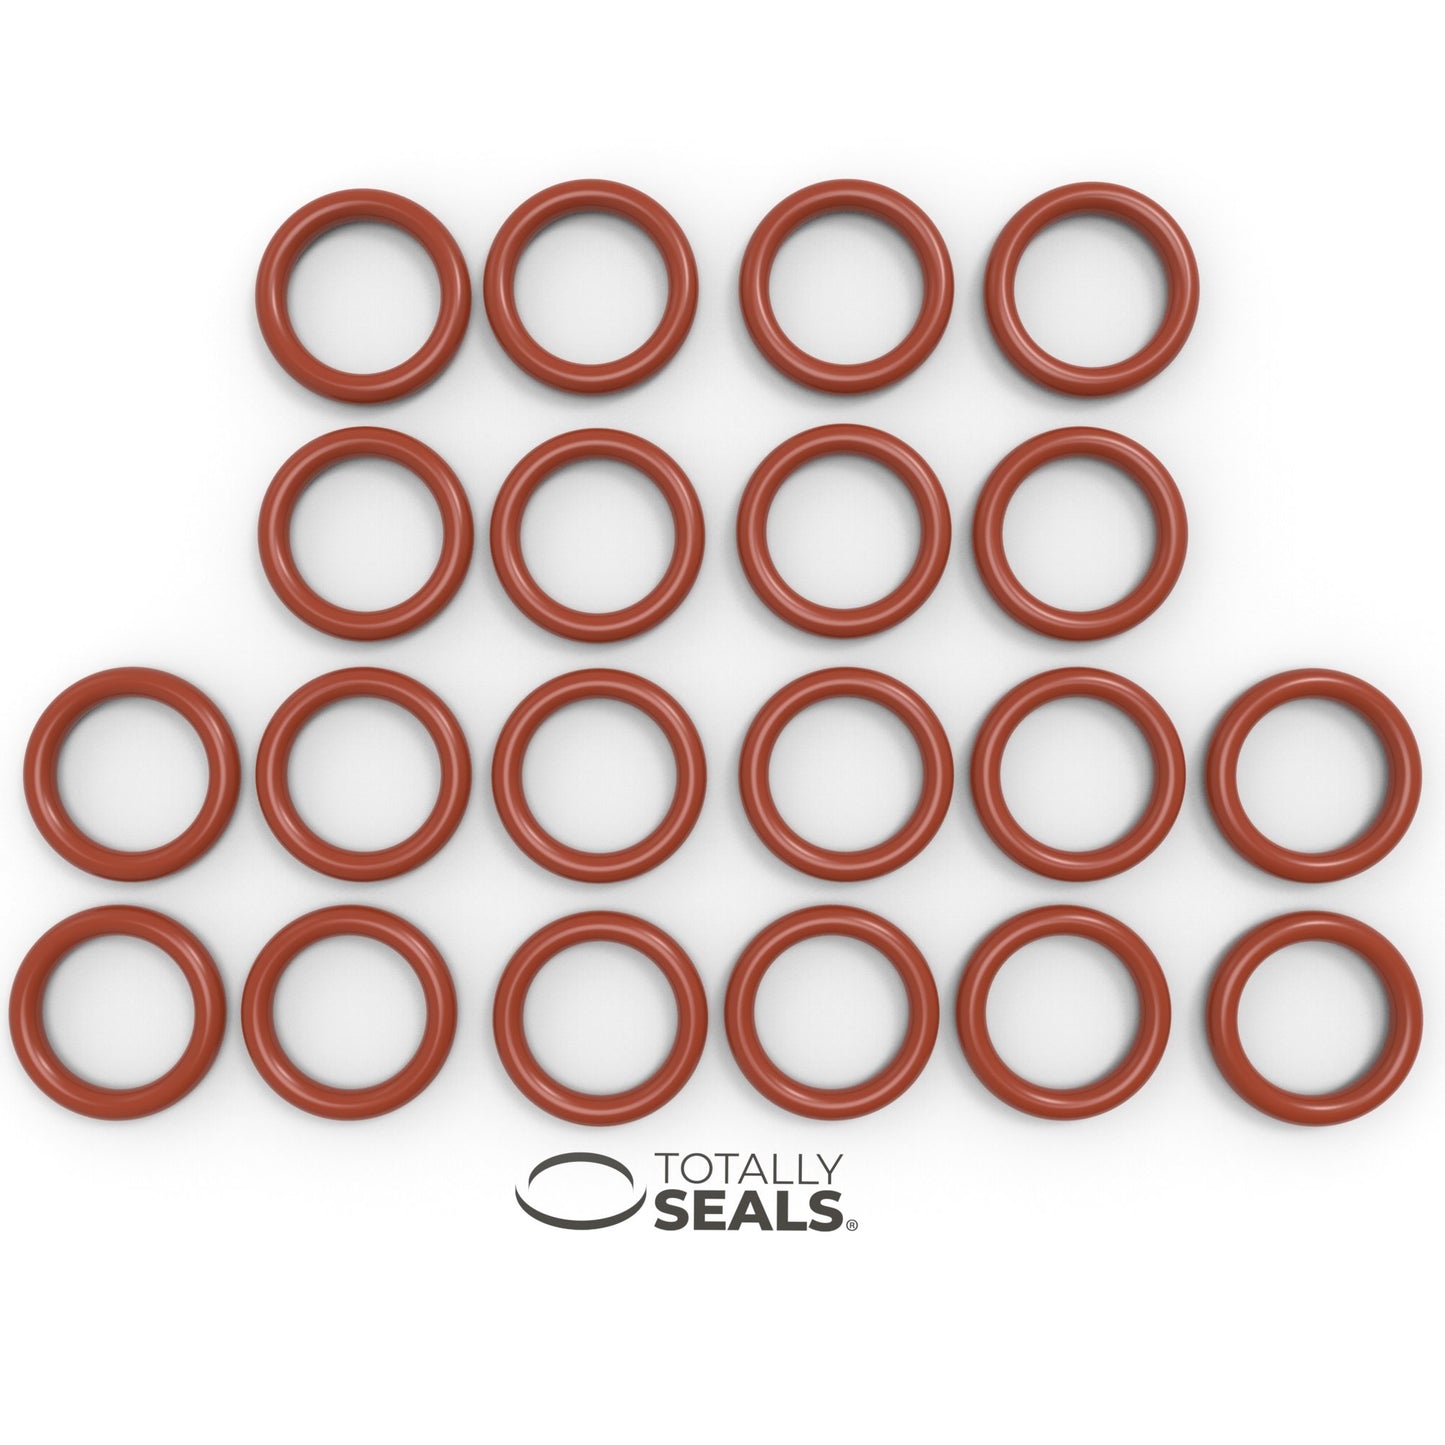 9mm x 2mm (13mm OD) Silicone O-Rings - Totally Seals®